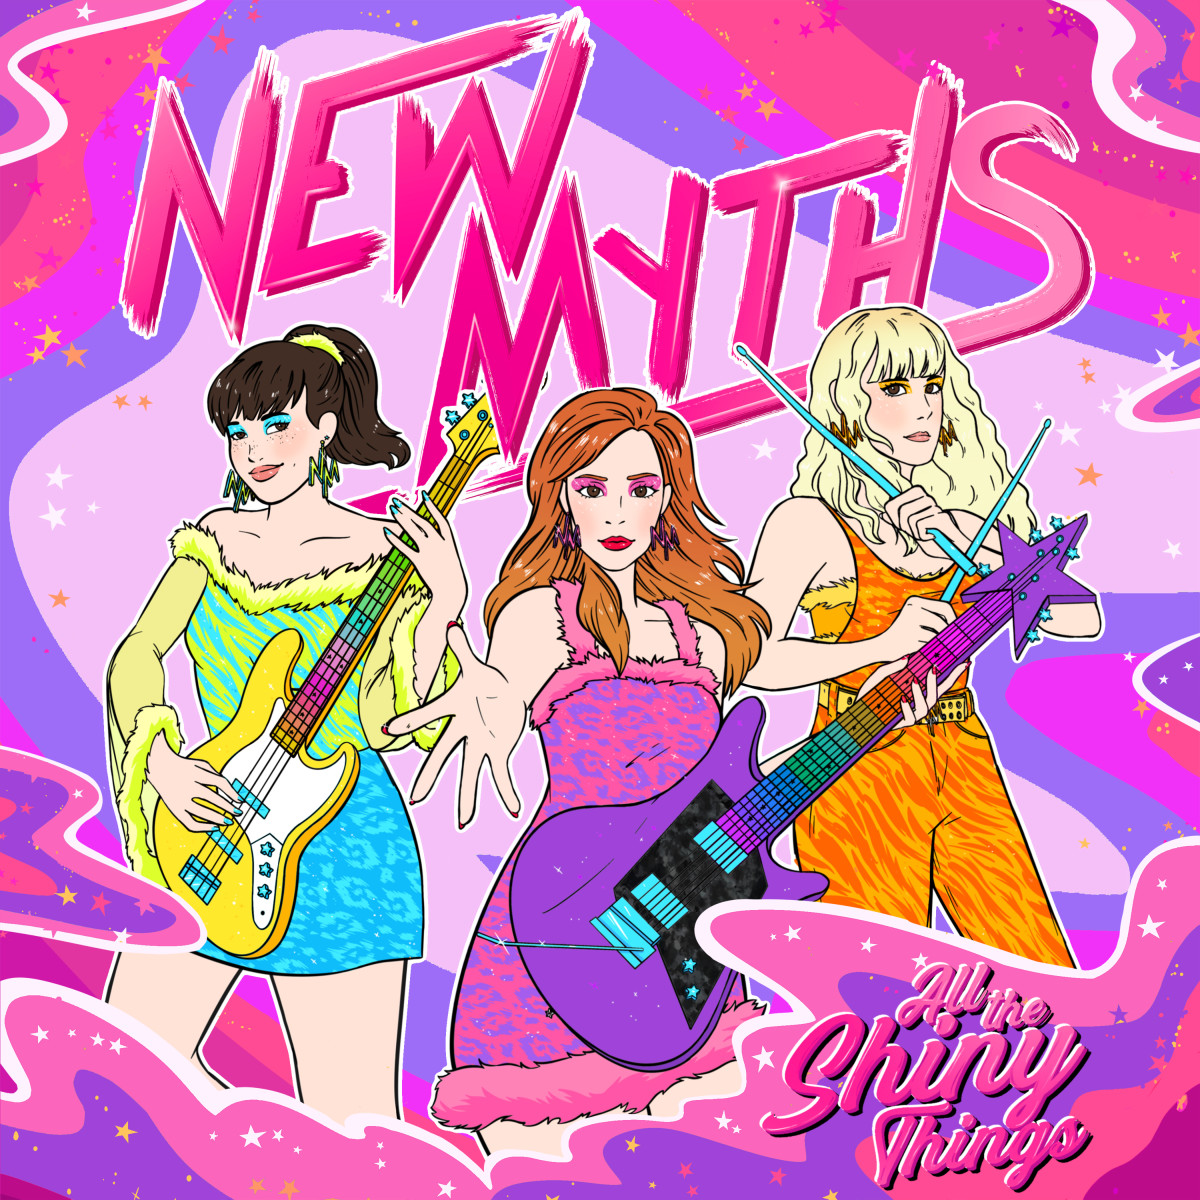 All The Shiny Things, the new EP from the all-female, NYC-based band New Myths, is a digital release that is available from Amazon, Apple Music and other retailers.